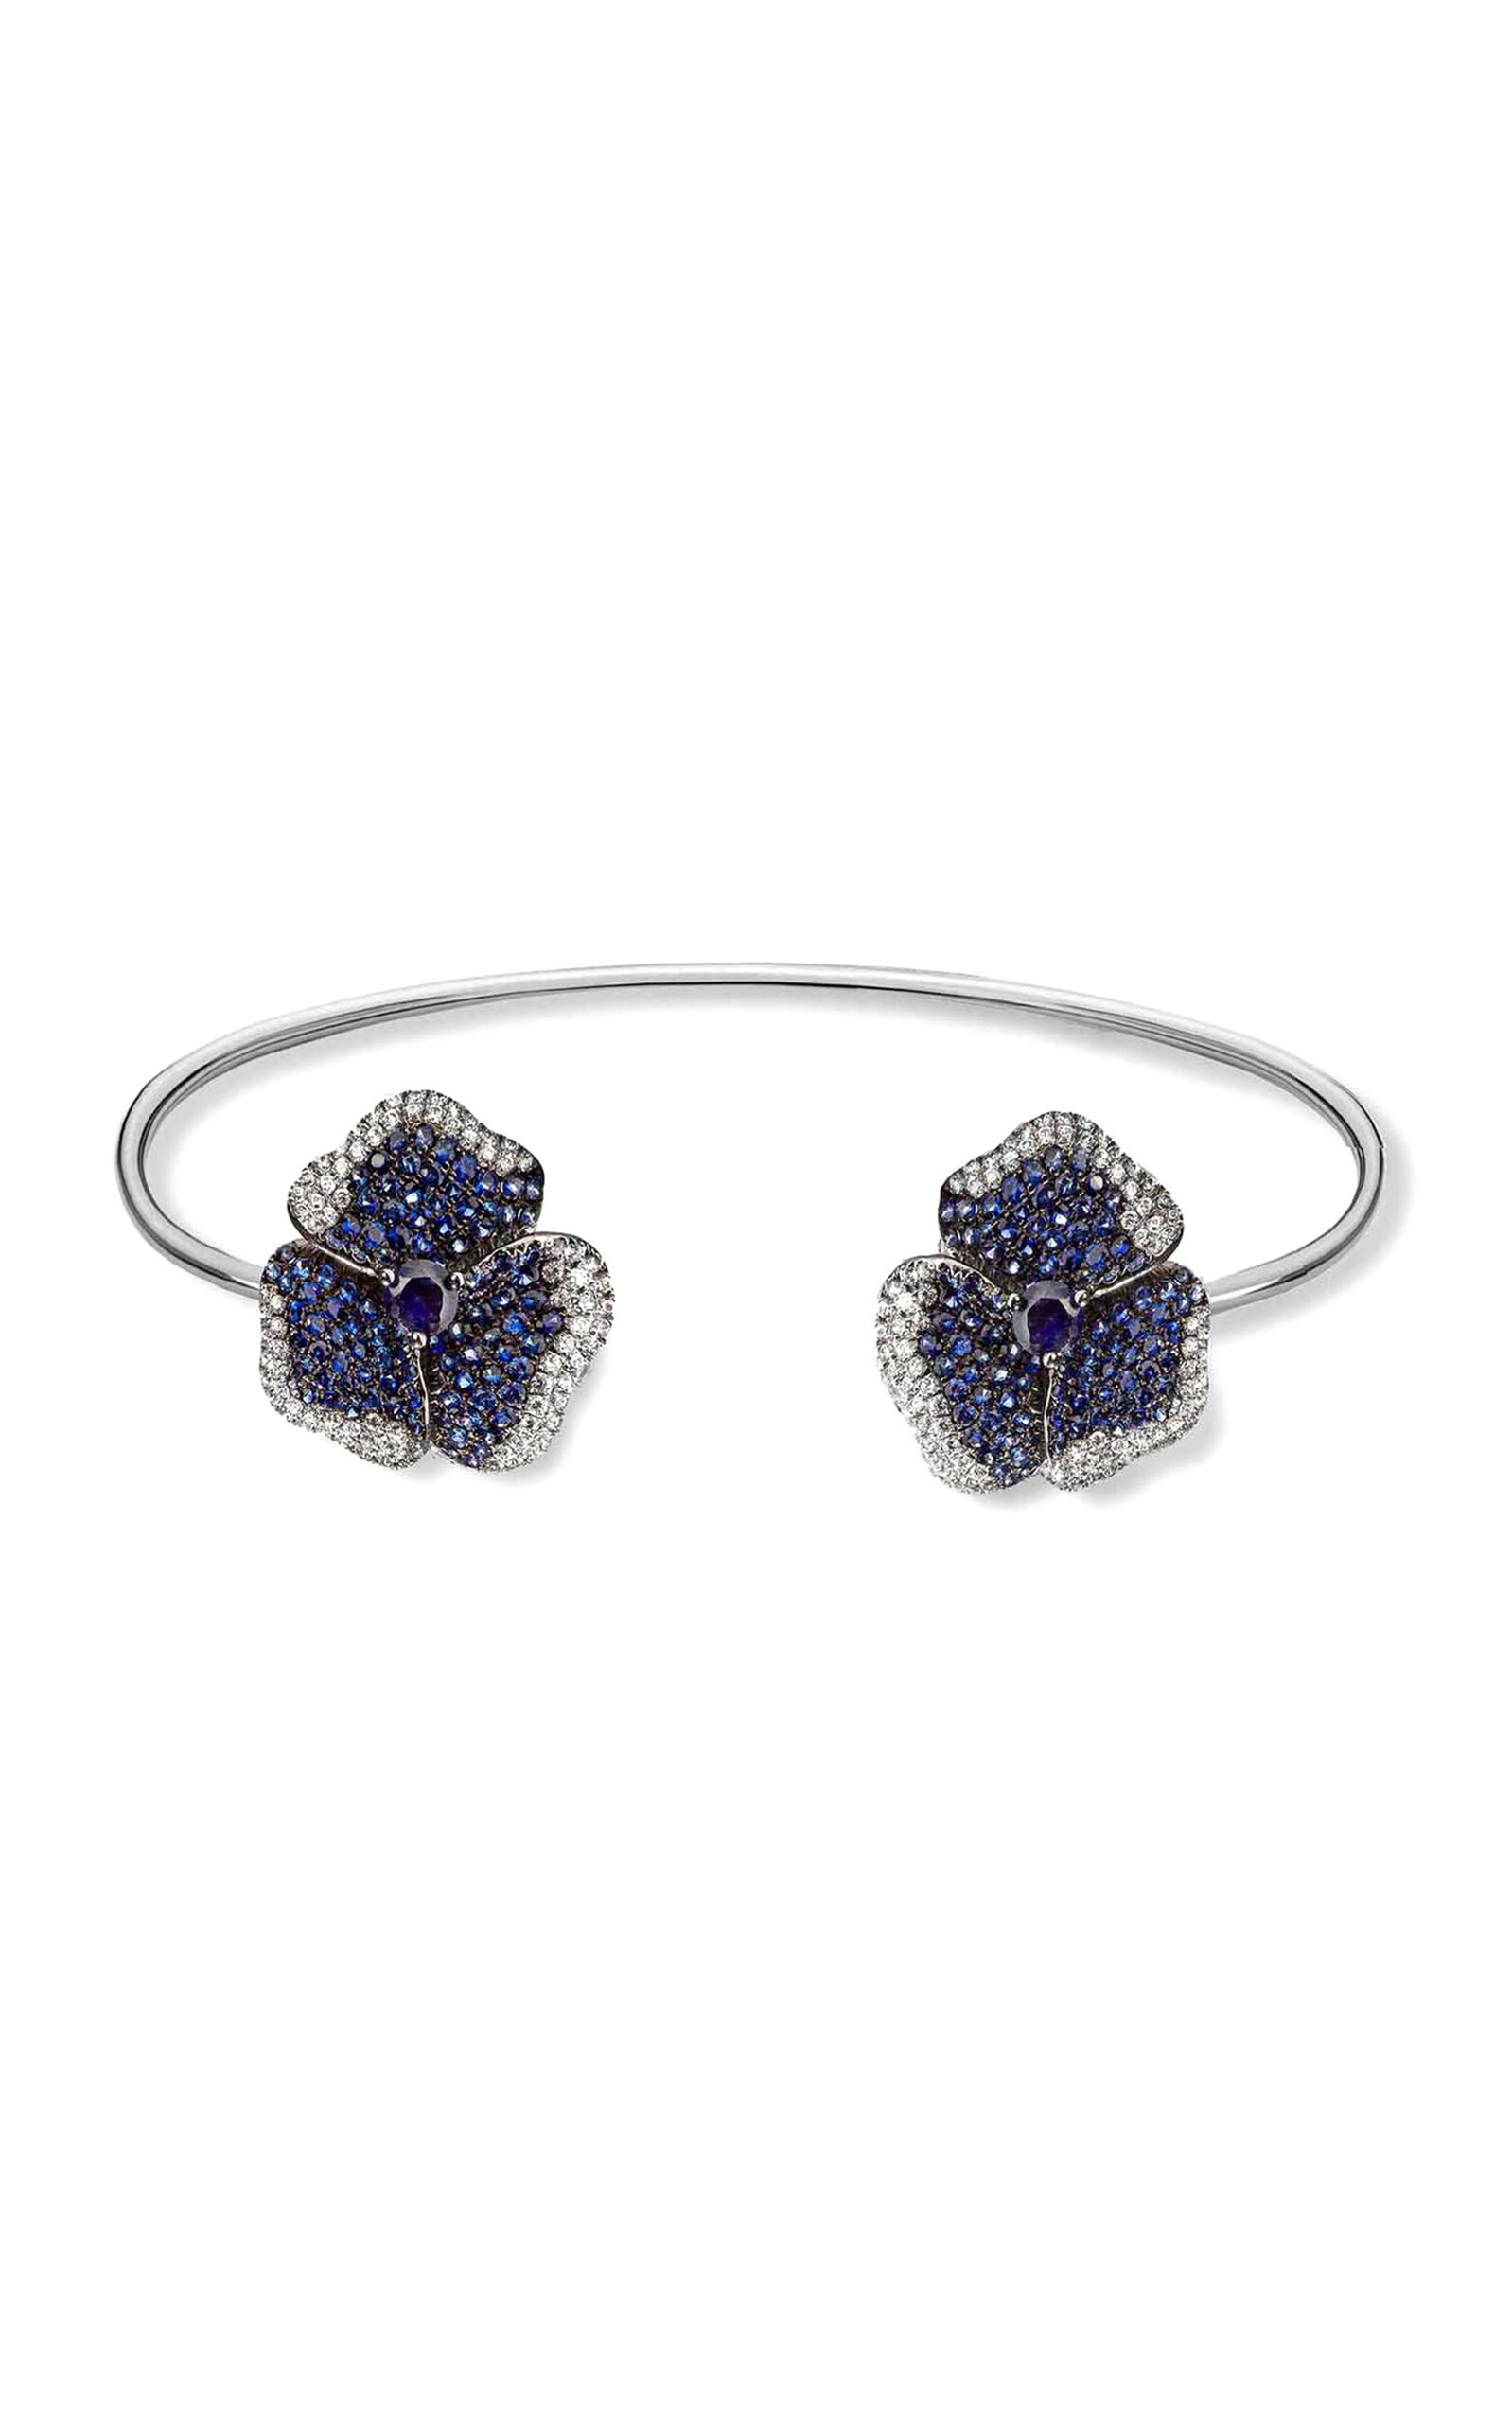 As29 One Of A Kind Bloom 18k White Gold; Diamond; And Sapphire Bangle In Blue